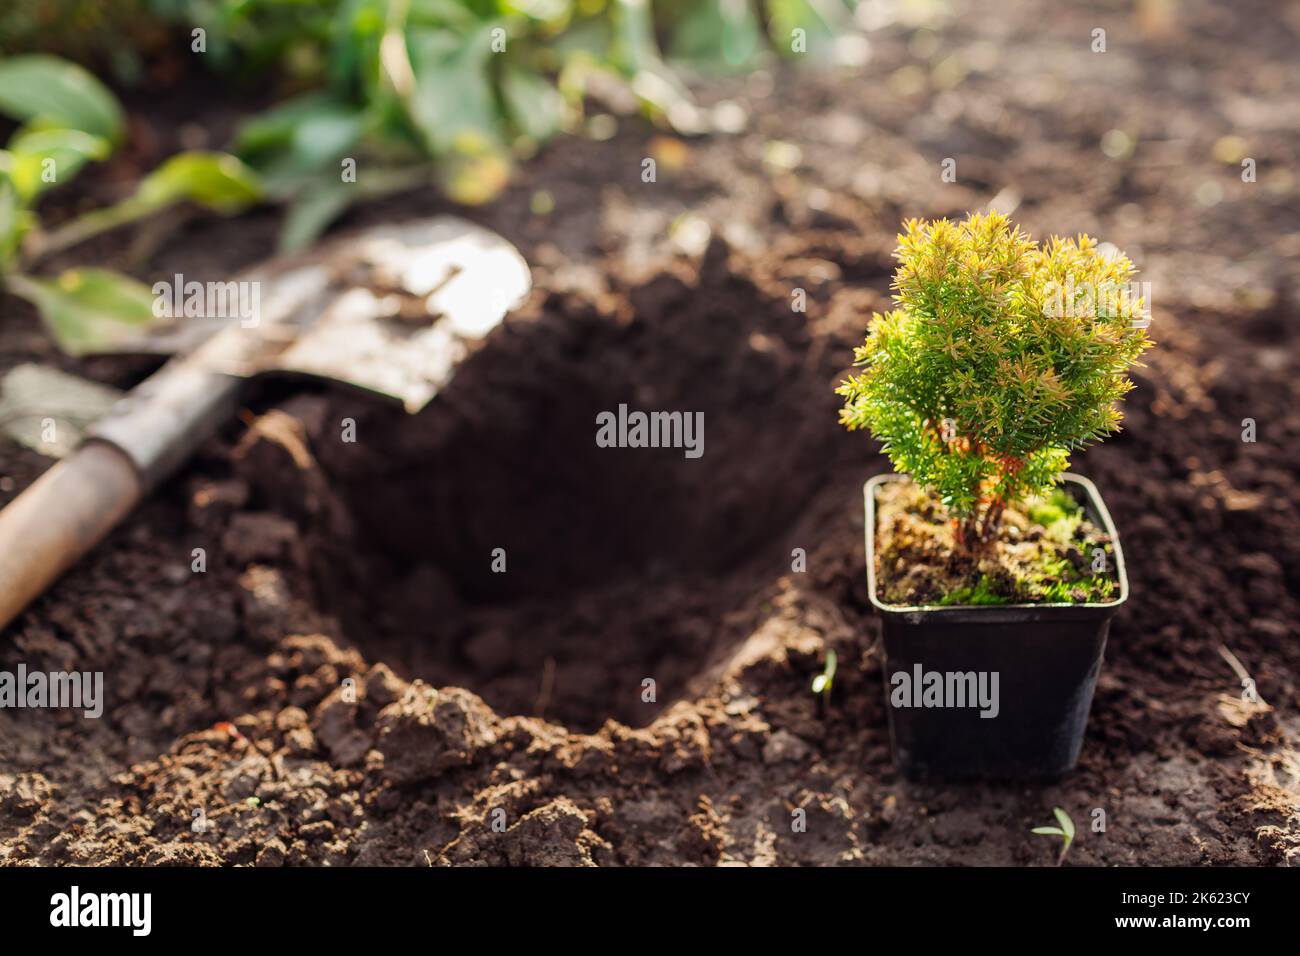 Planting anniek arborvitae into soil. Small evergreen spherical thuja in p9 container ready for transplanting in fall garden. Digging hole with shovel Stock Photo